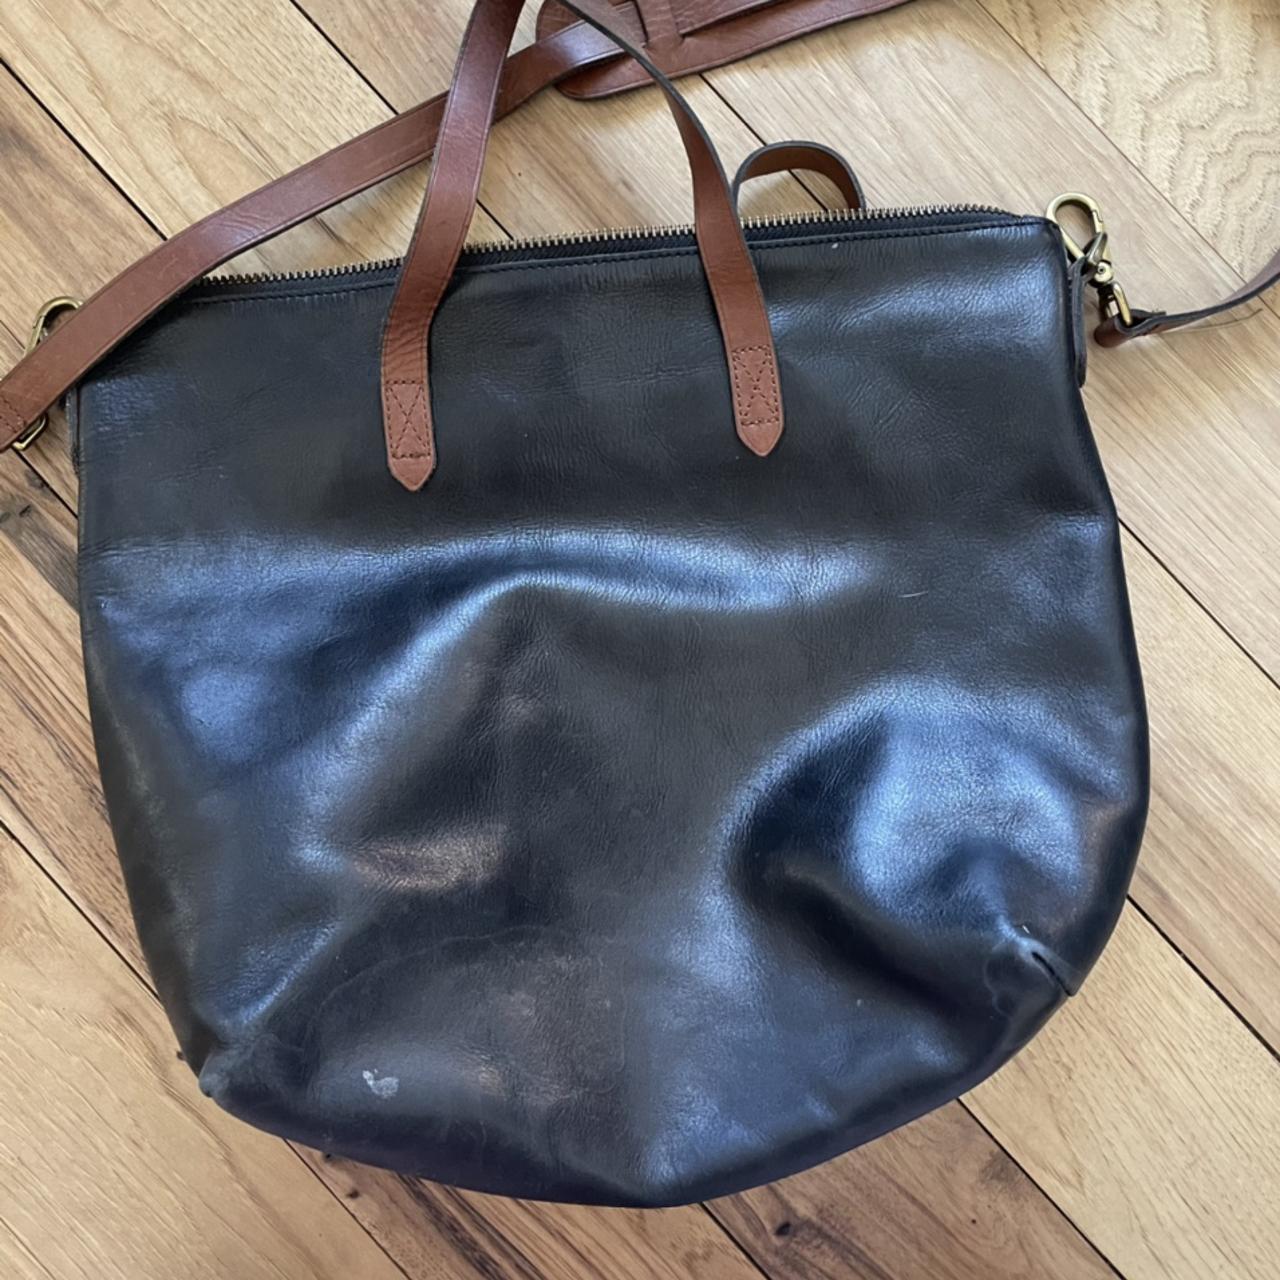 Hermes kelly cut black swift leather with square n - Depop